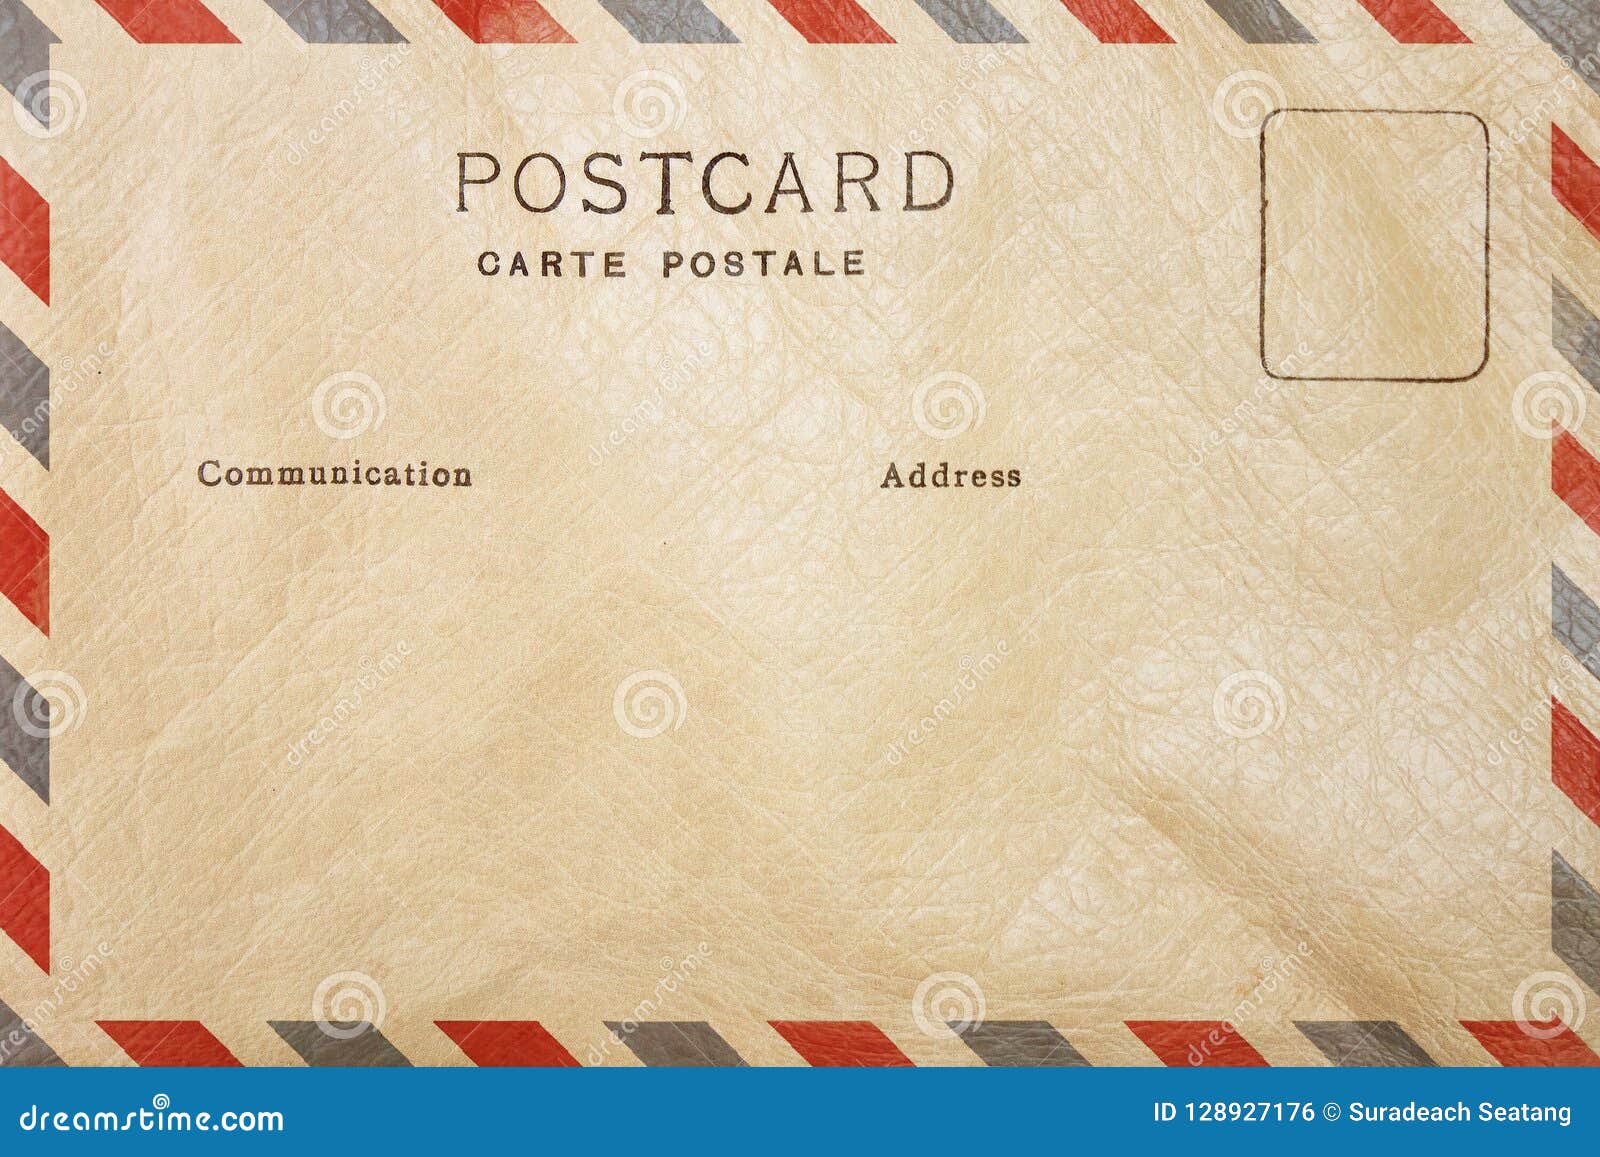 Back of Airmail Blank Postcard Template Stock Illustration For Airmail Postcard Template